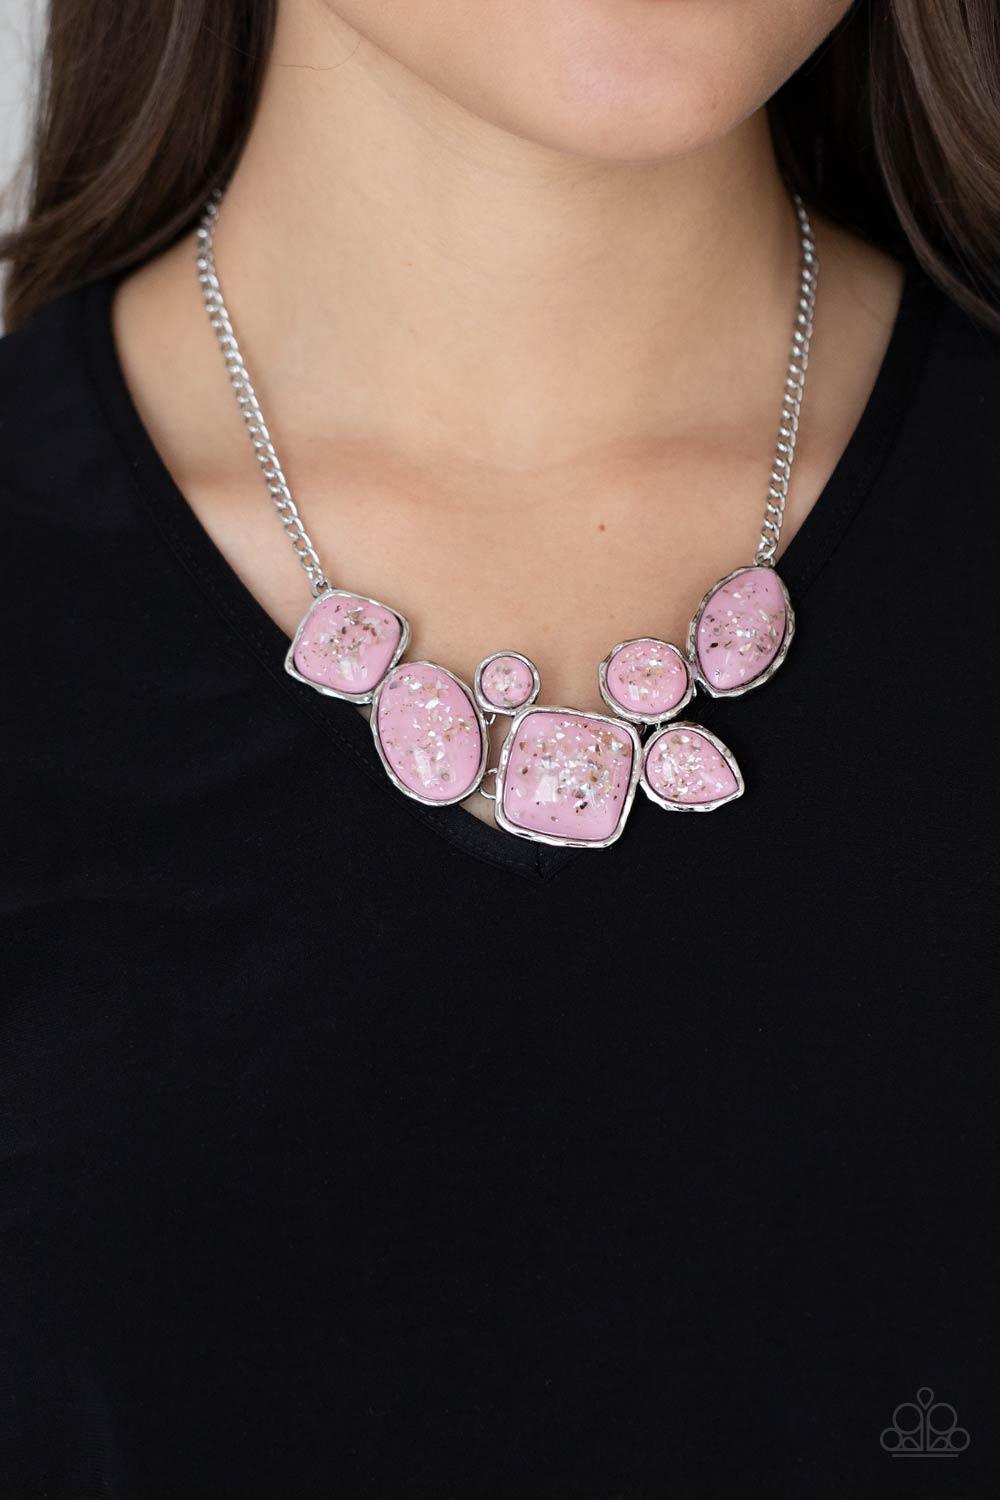 Paparazzi Accessories So Jelly - Pink Flecks of iridescent shell-like pieces are encased in glassy pink beads. Featuring hammered silver frames, the mismatched frames delicately cluster below the collar for an ethereal fashion. Features an adjustable clas